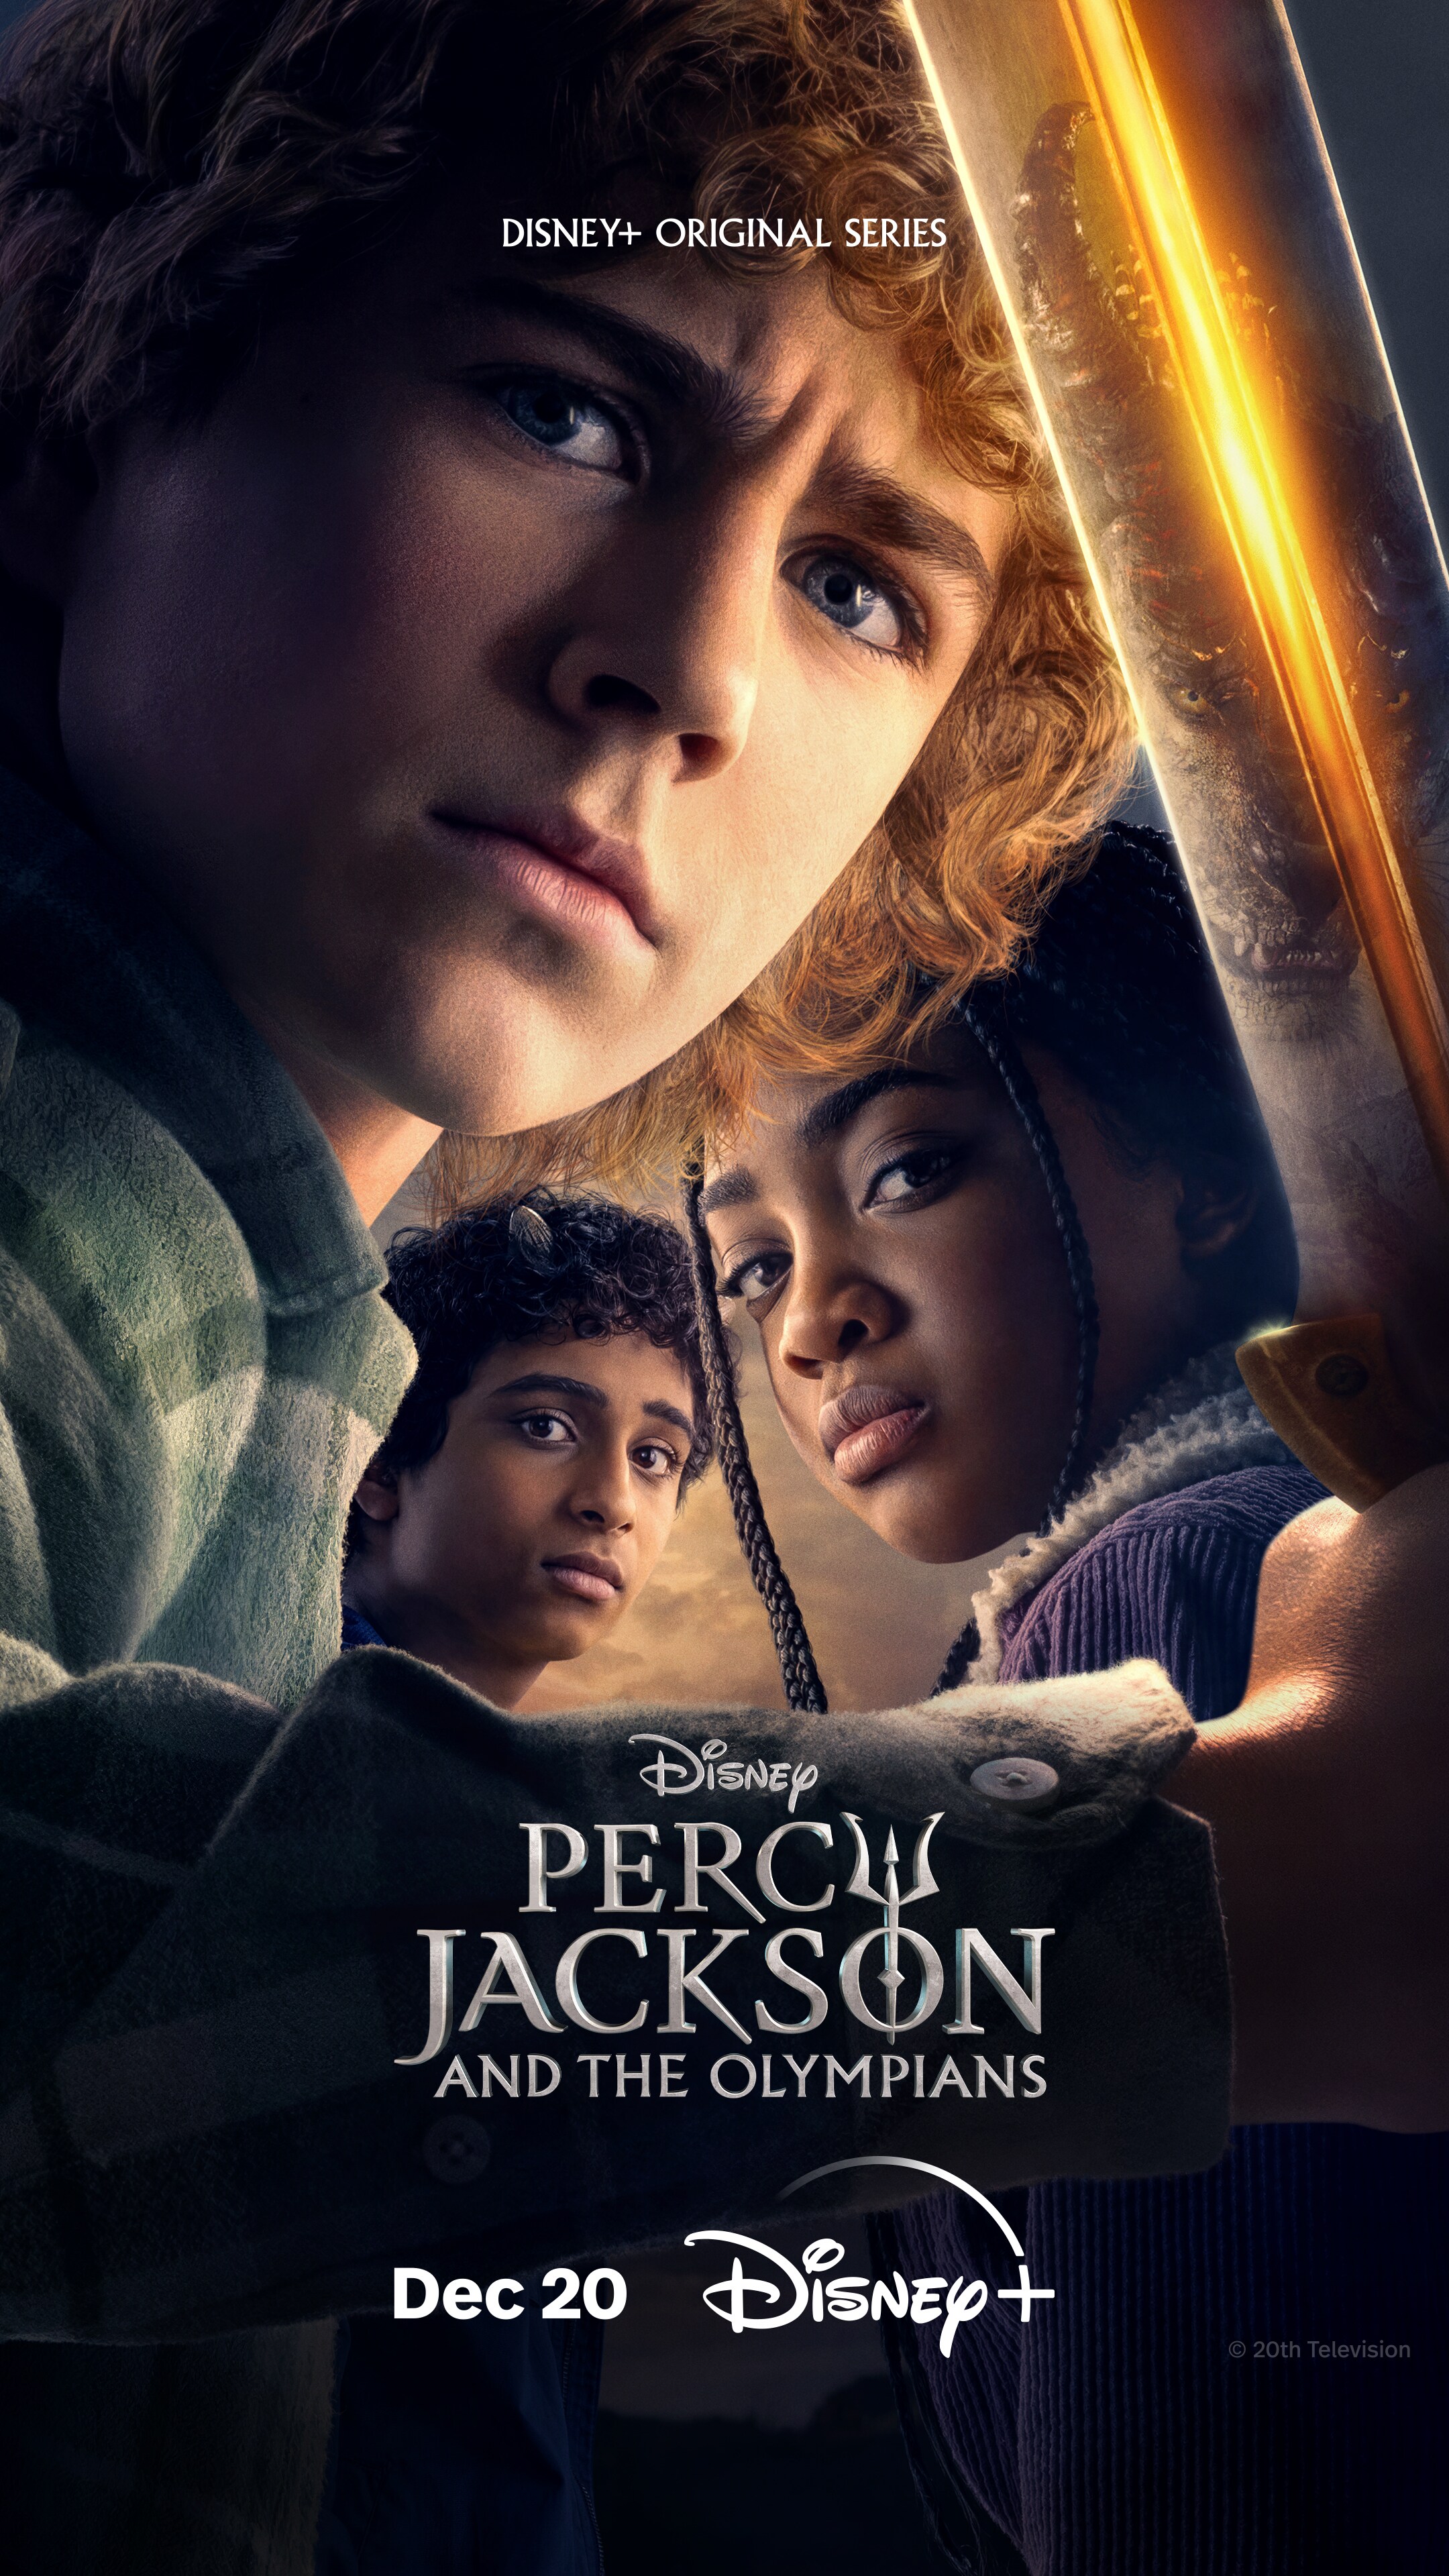 Our Percy Jackson —